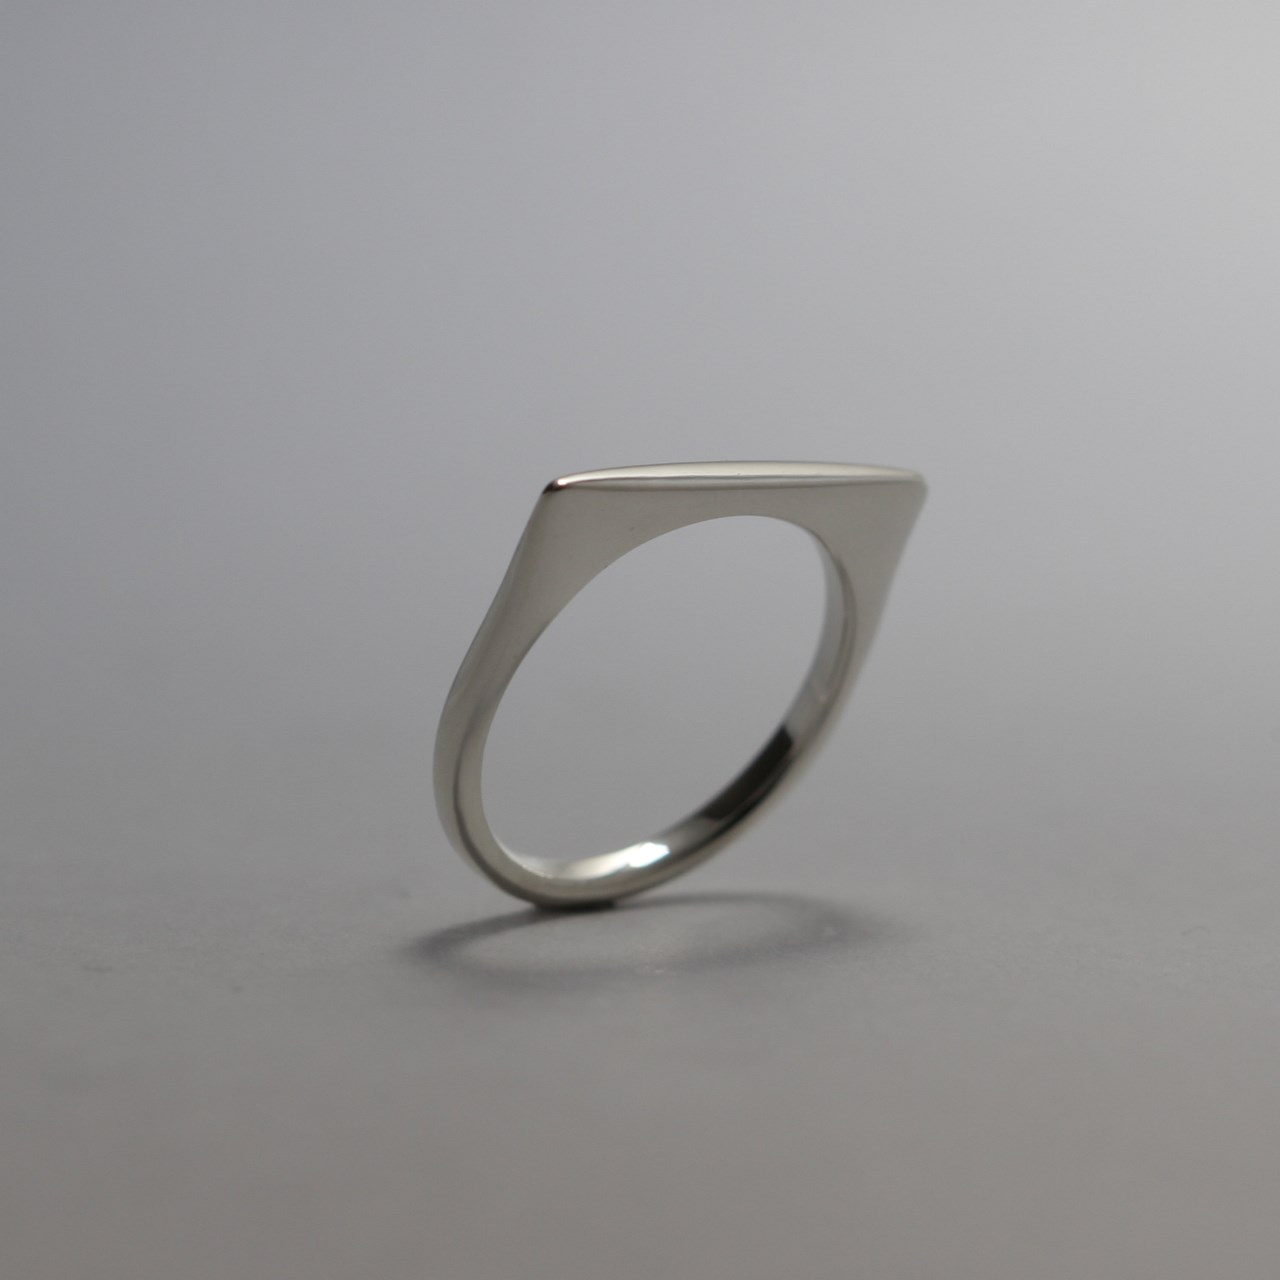 oval-flat-ring02